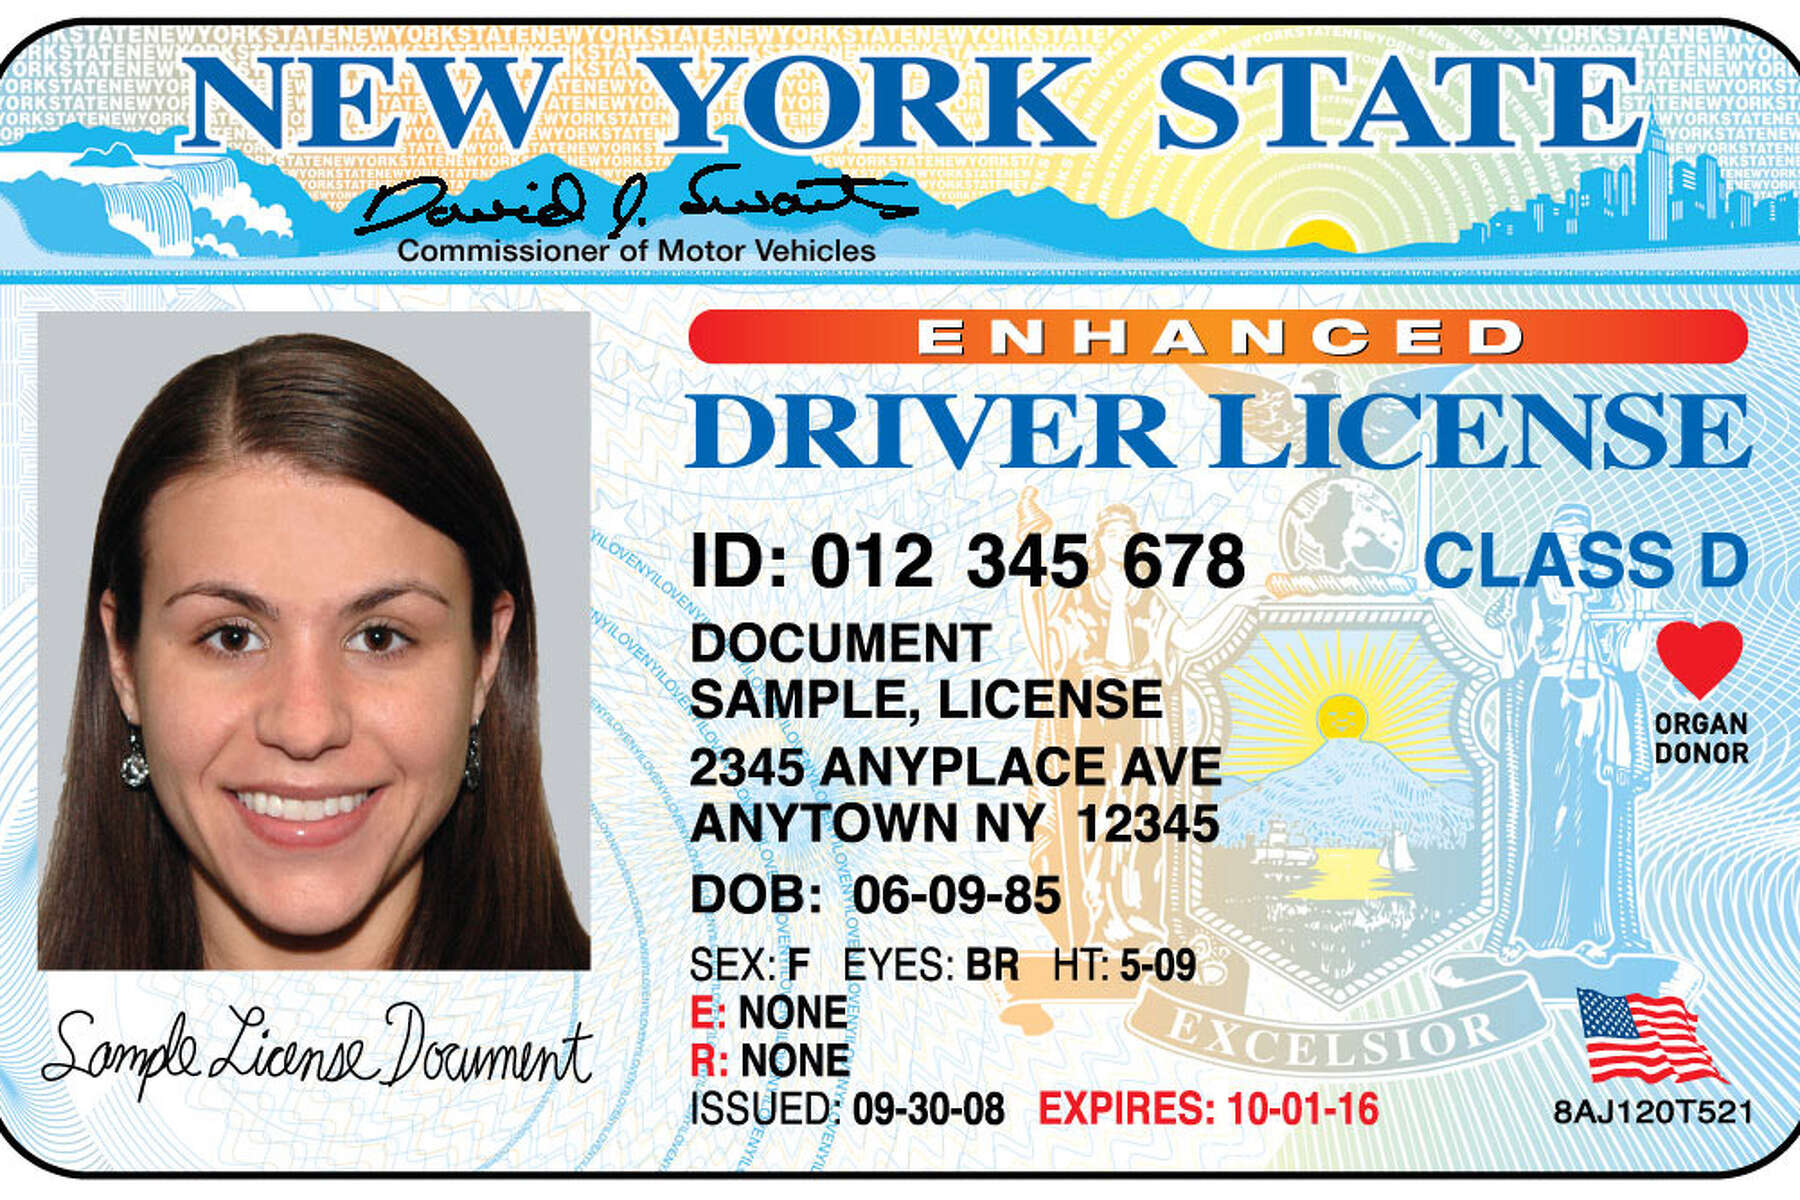 what to bring to dmv to renew license ny